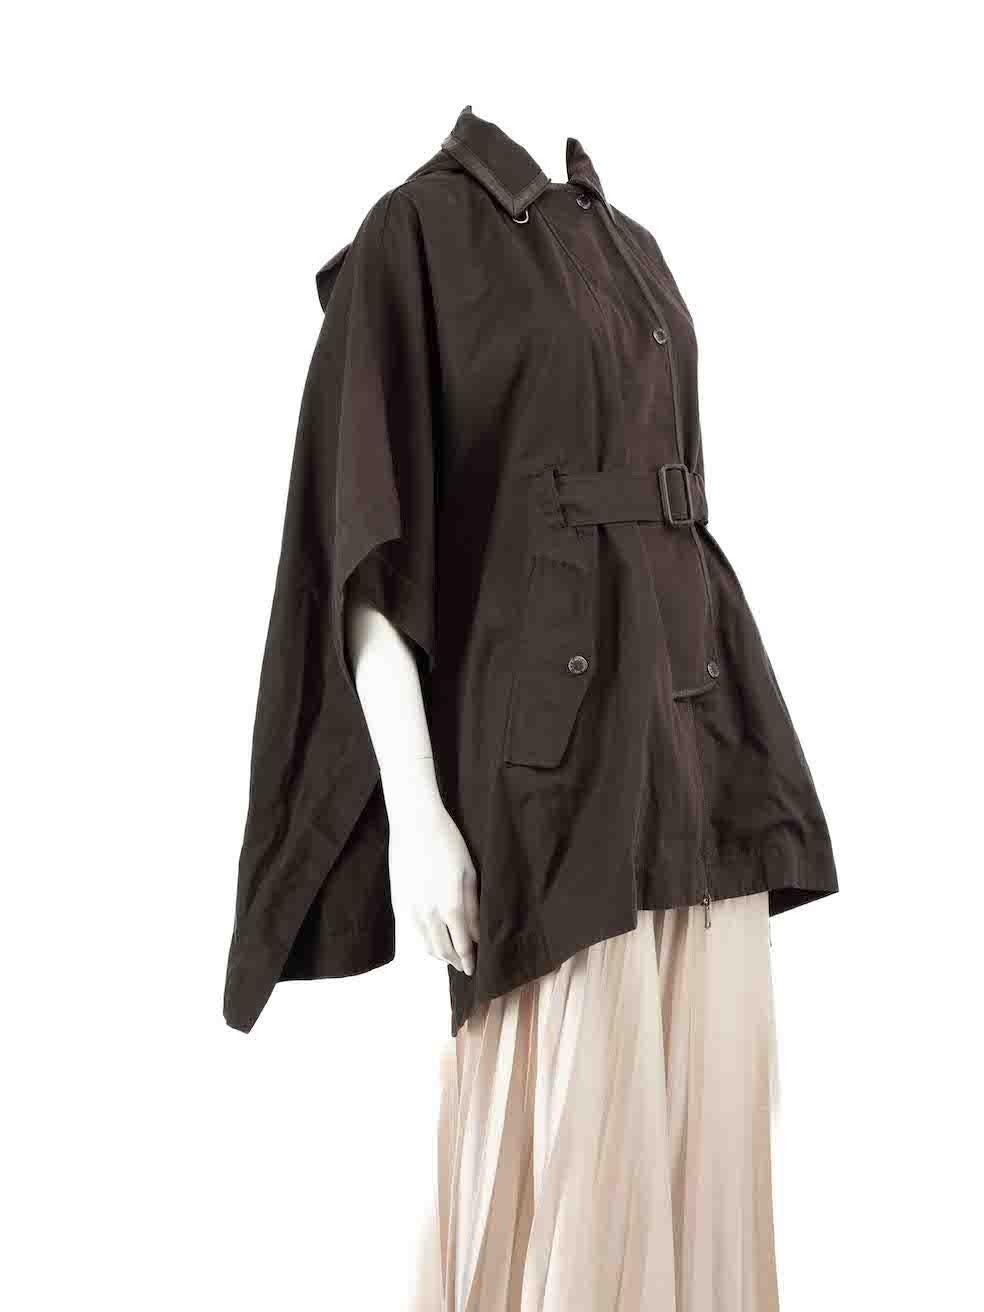 CONDITION is Very good. Minimal wear to poncho is evident. Minimal wear to back neck chain which is partially attached on this used Weekend by Max Mara designer resale item.
 
 
 
 Details
 
 
 Brown
 
 Cotton
 
 Cape
 
 Zip and snap button